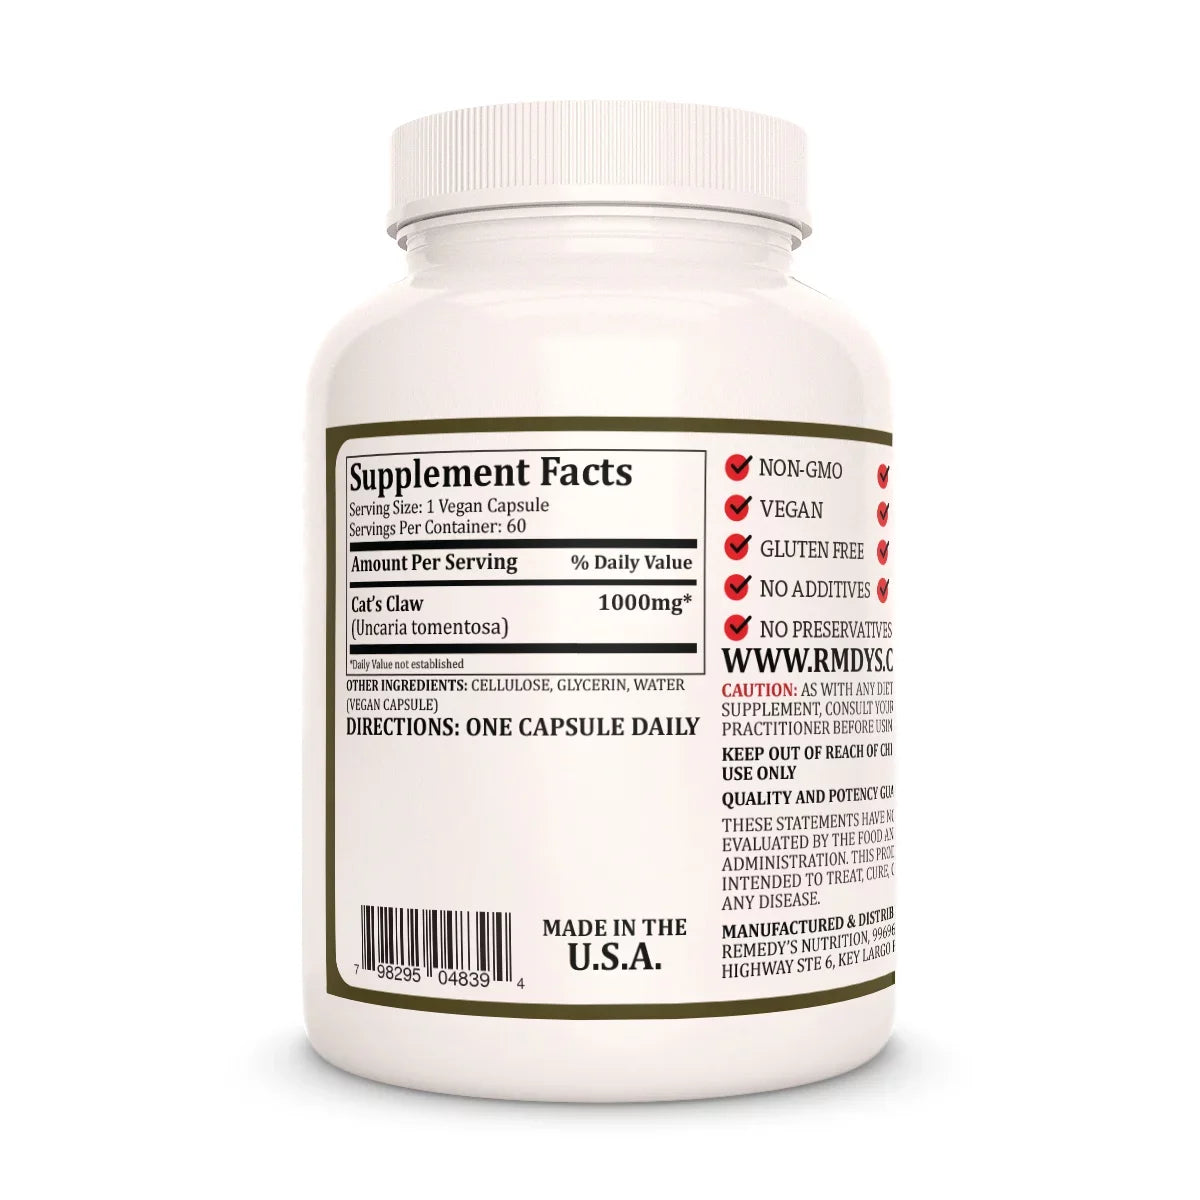 Image of Remedy's Nutrition® Cat's Claw Capsules Dietary Supplement front bottle. Made in the USA.  Uncaria tomentosa.